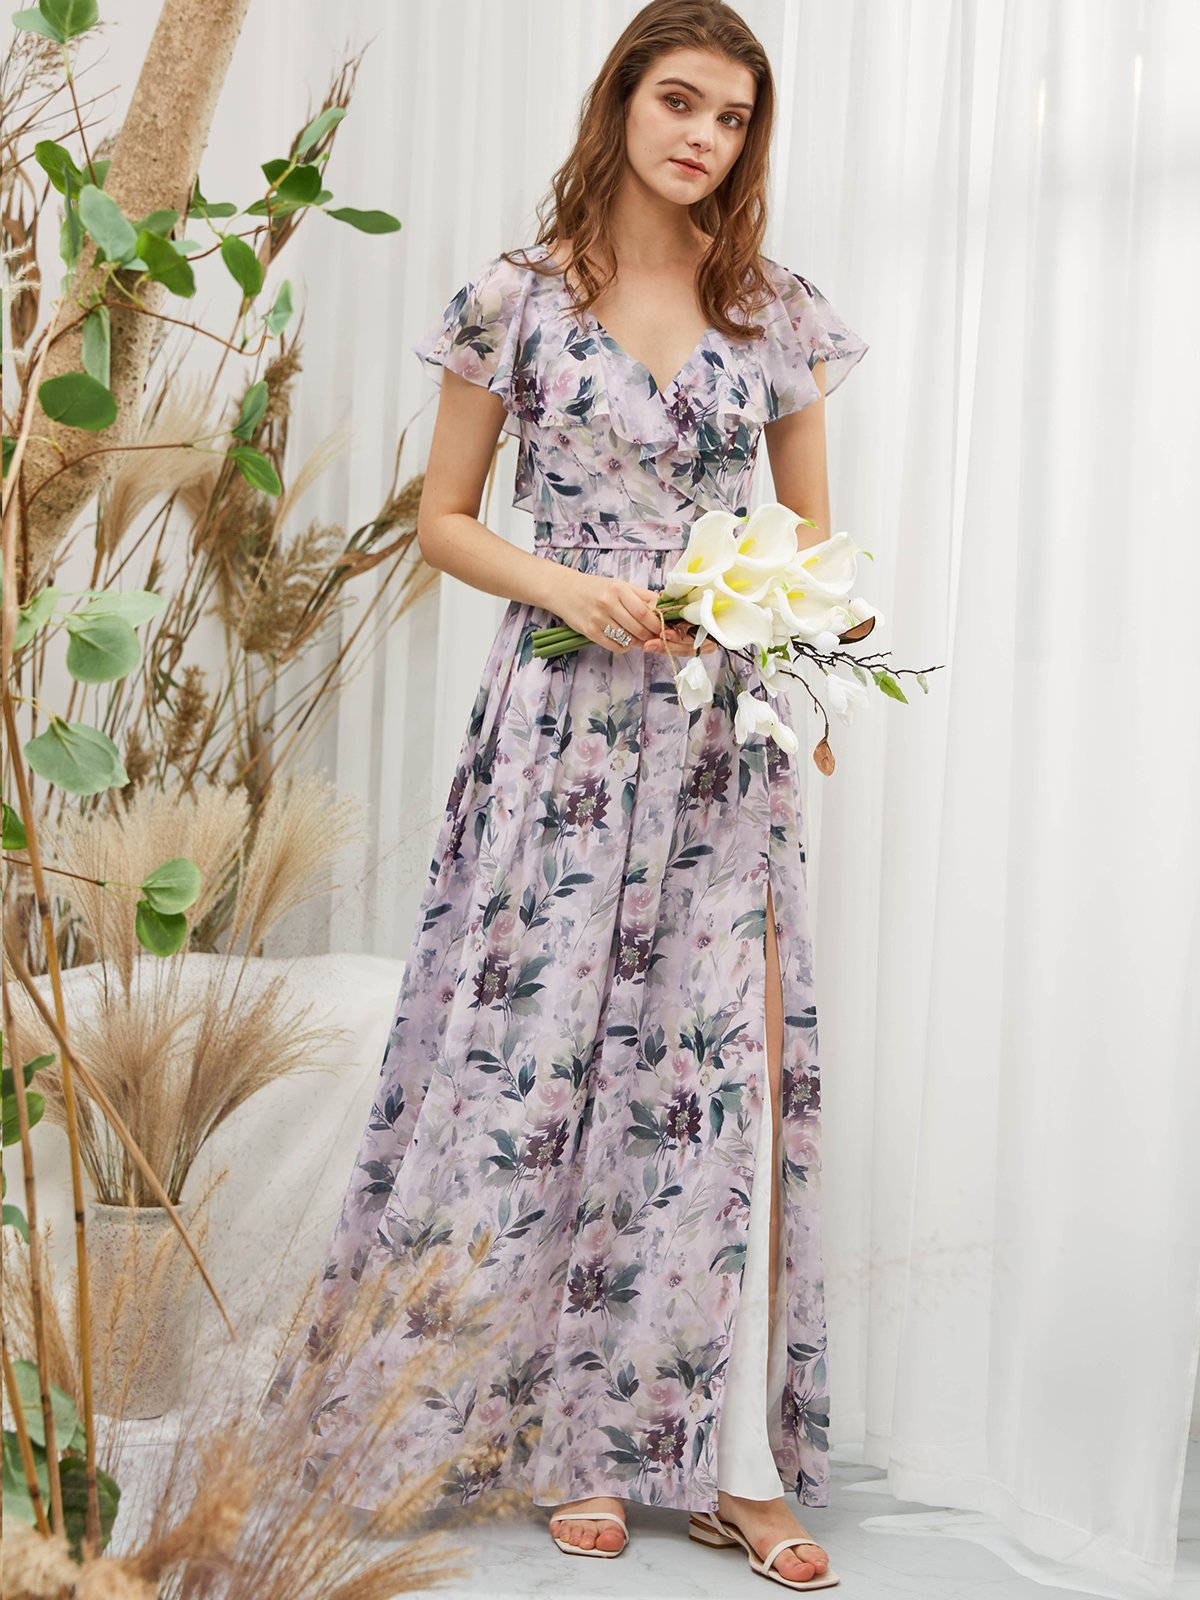 Cap Sleeves V Neck Chiffon Print Floral Wisteria Floor Length Formal Gown